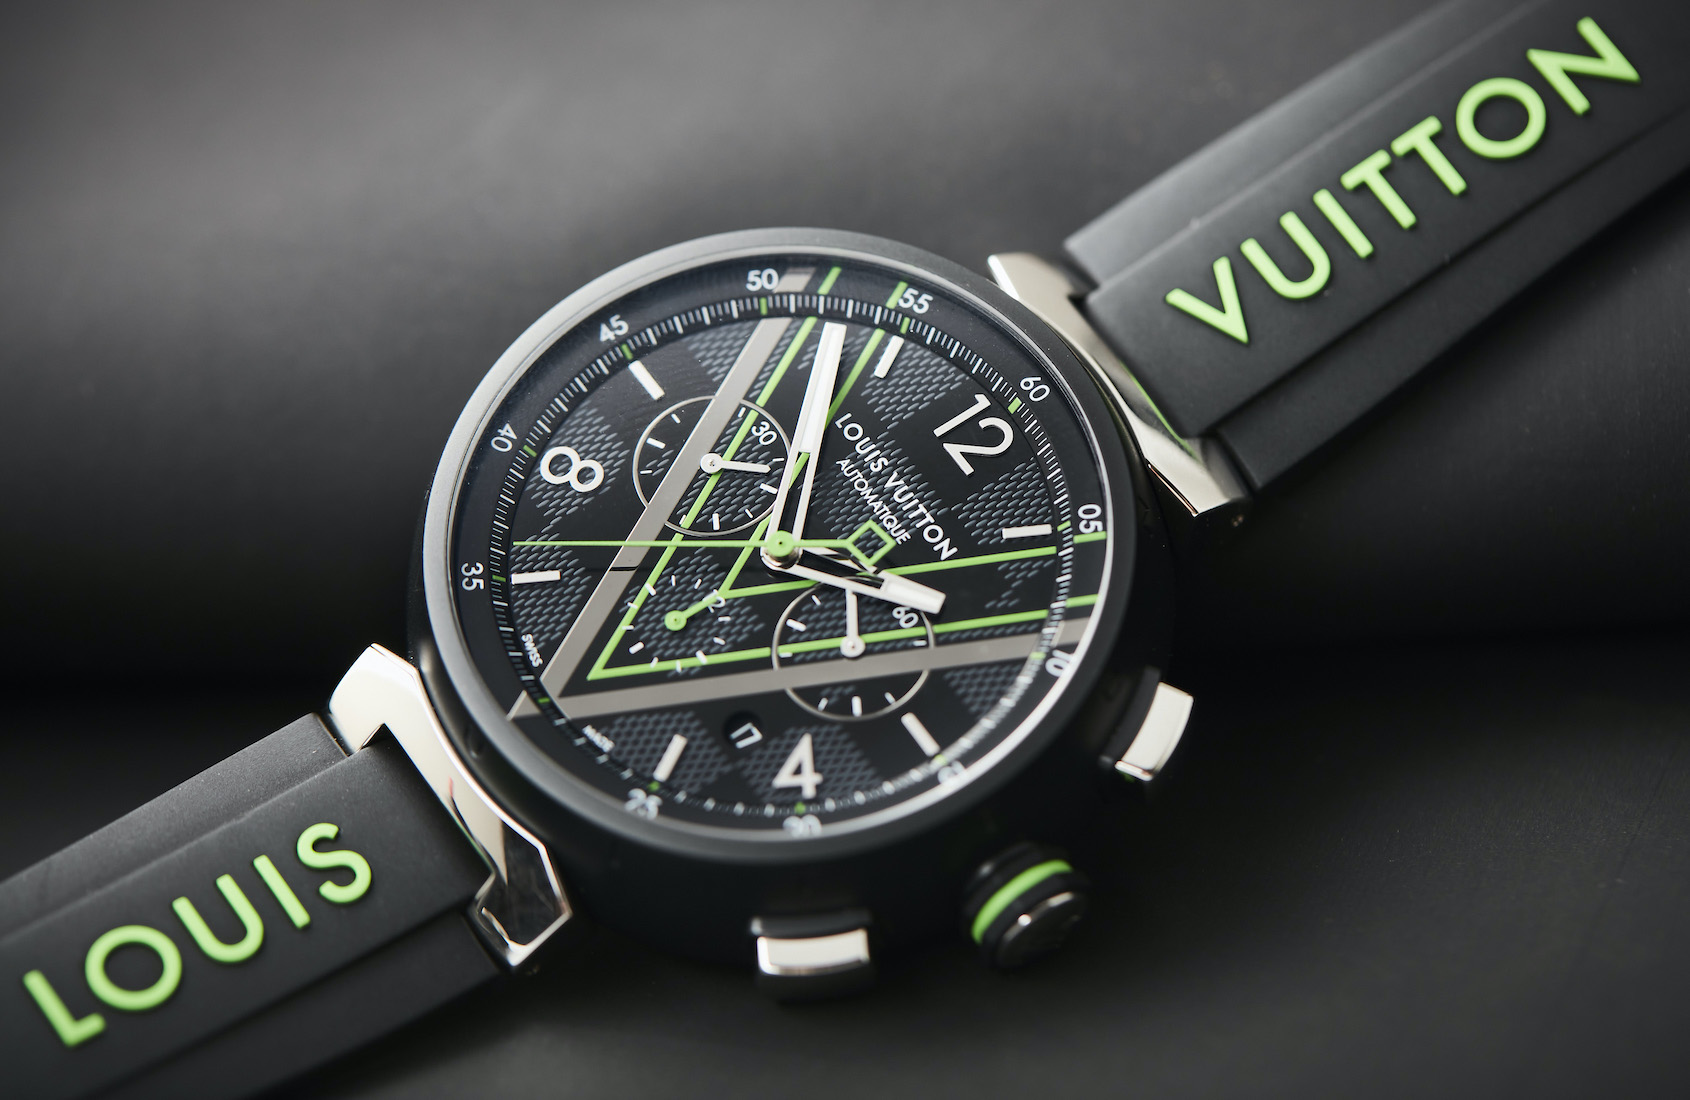 The Louis Vuitton Green Sports Watch Is Now Available